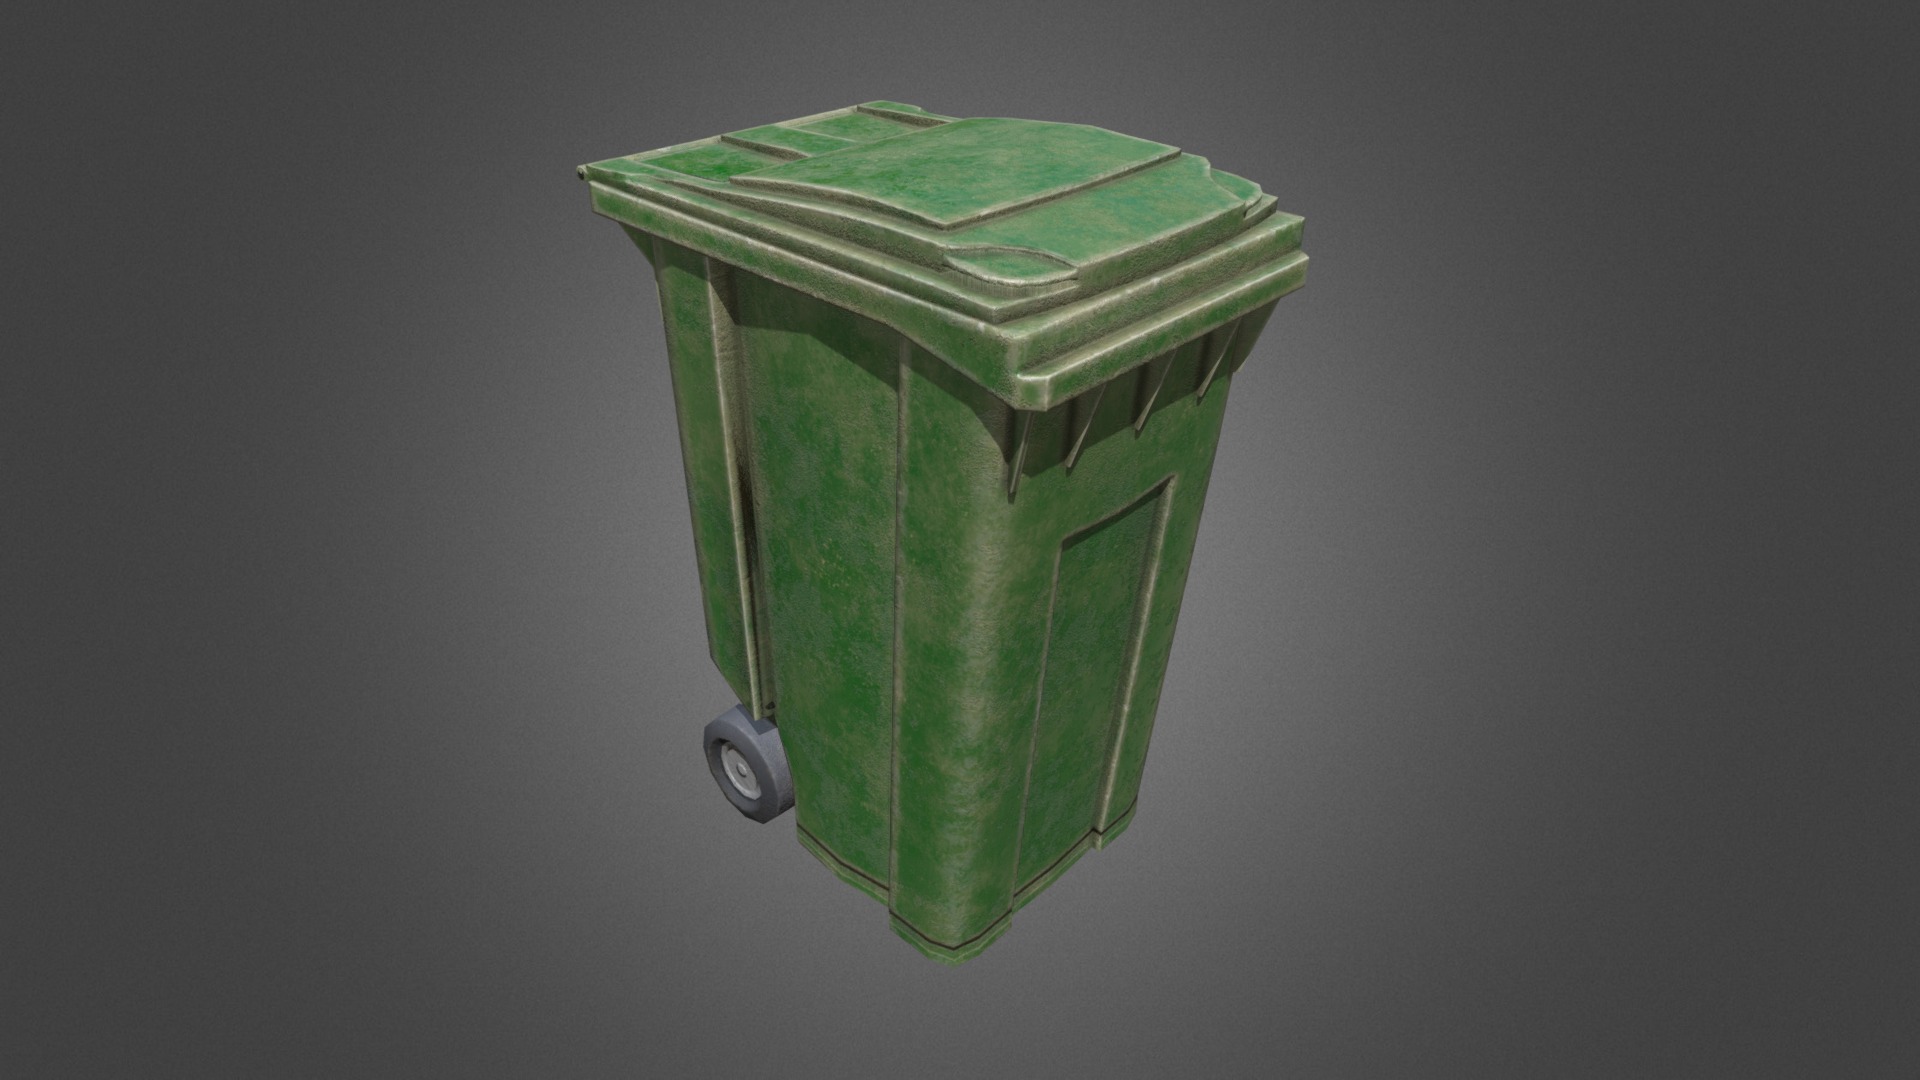 3D model Trash can - This is a 3D model of the Trash can. The 3D model is about a green and white lamp.